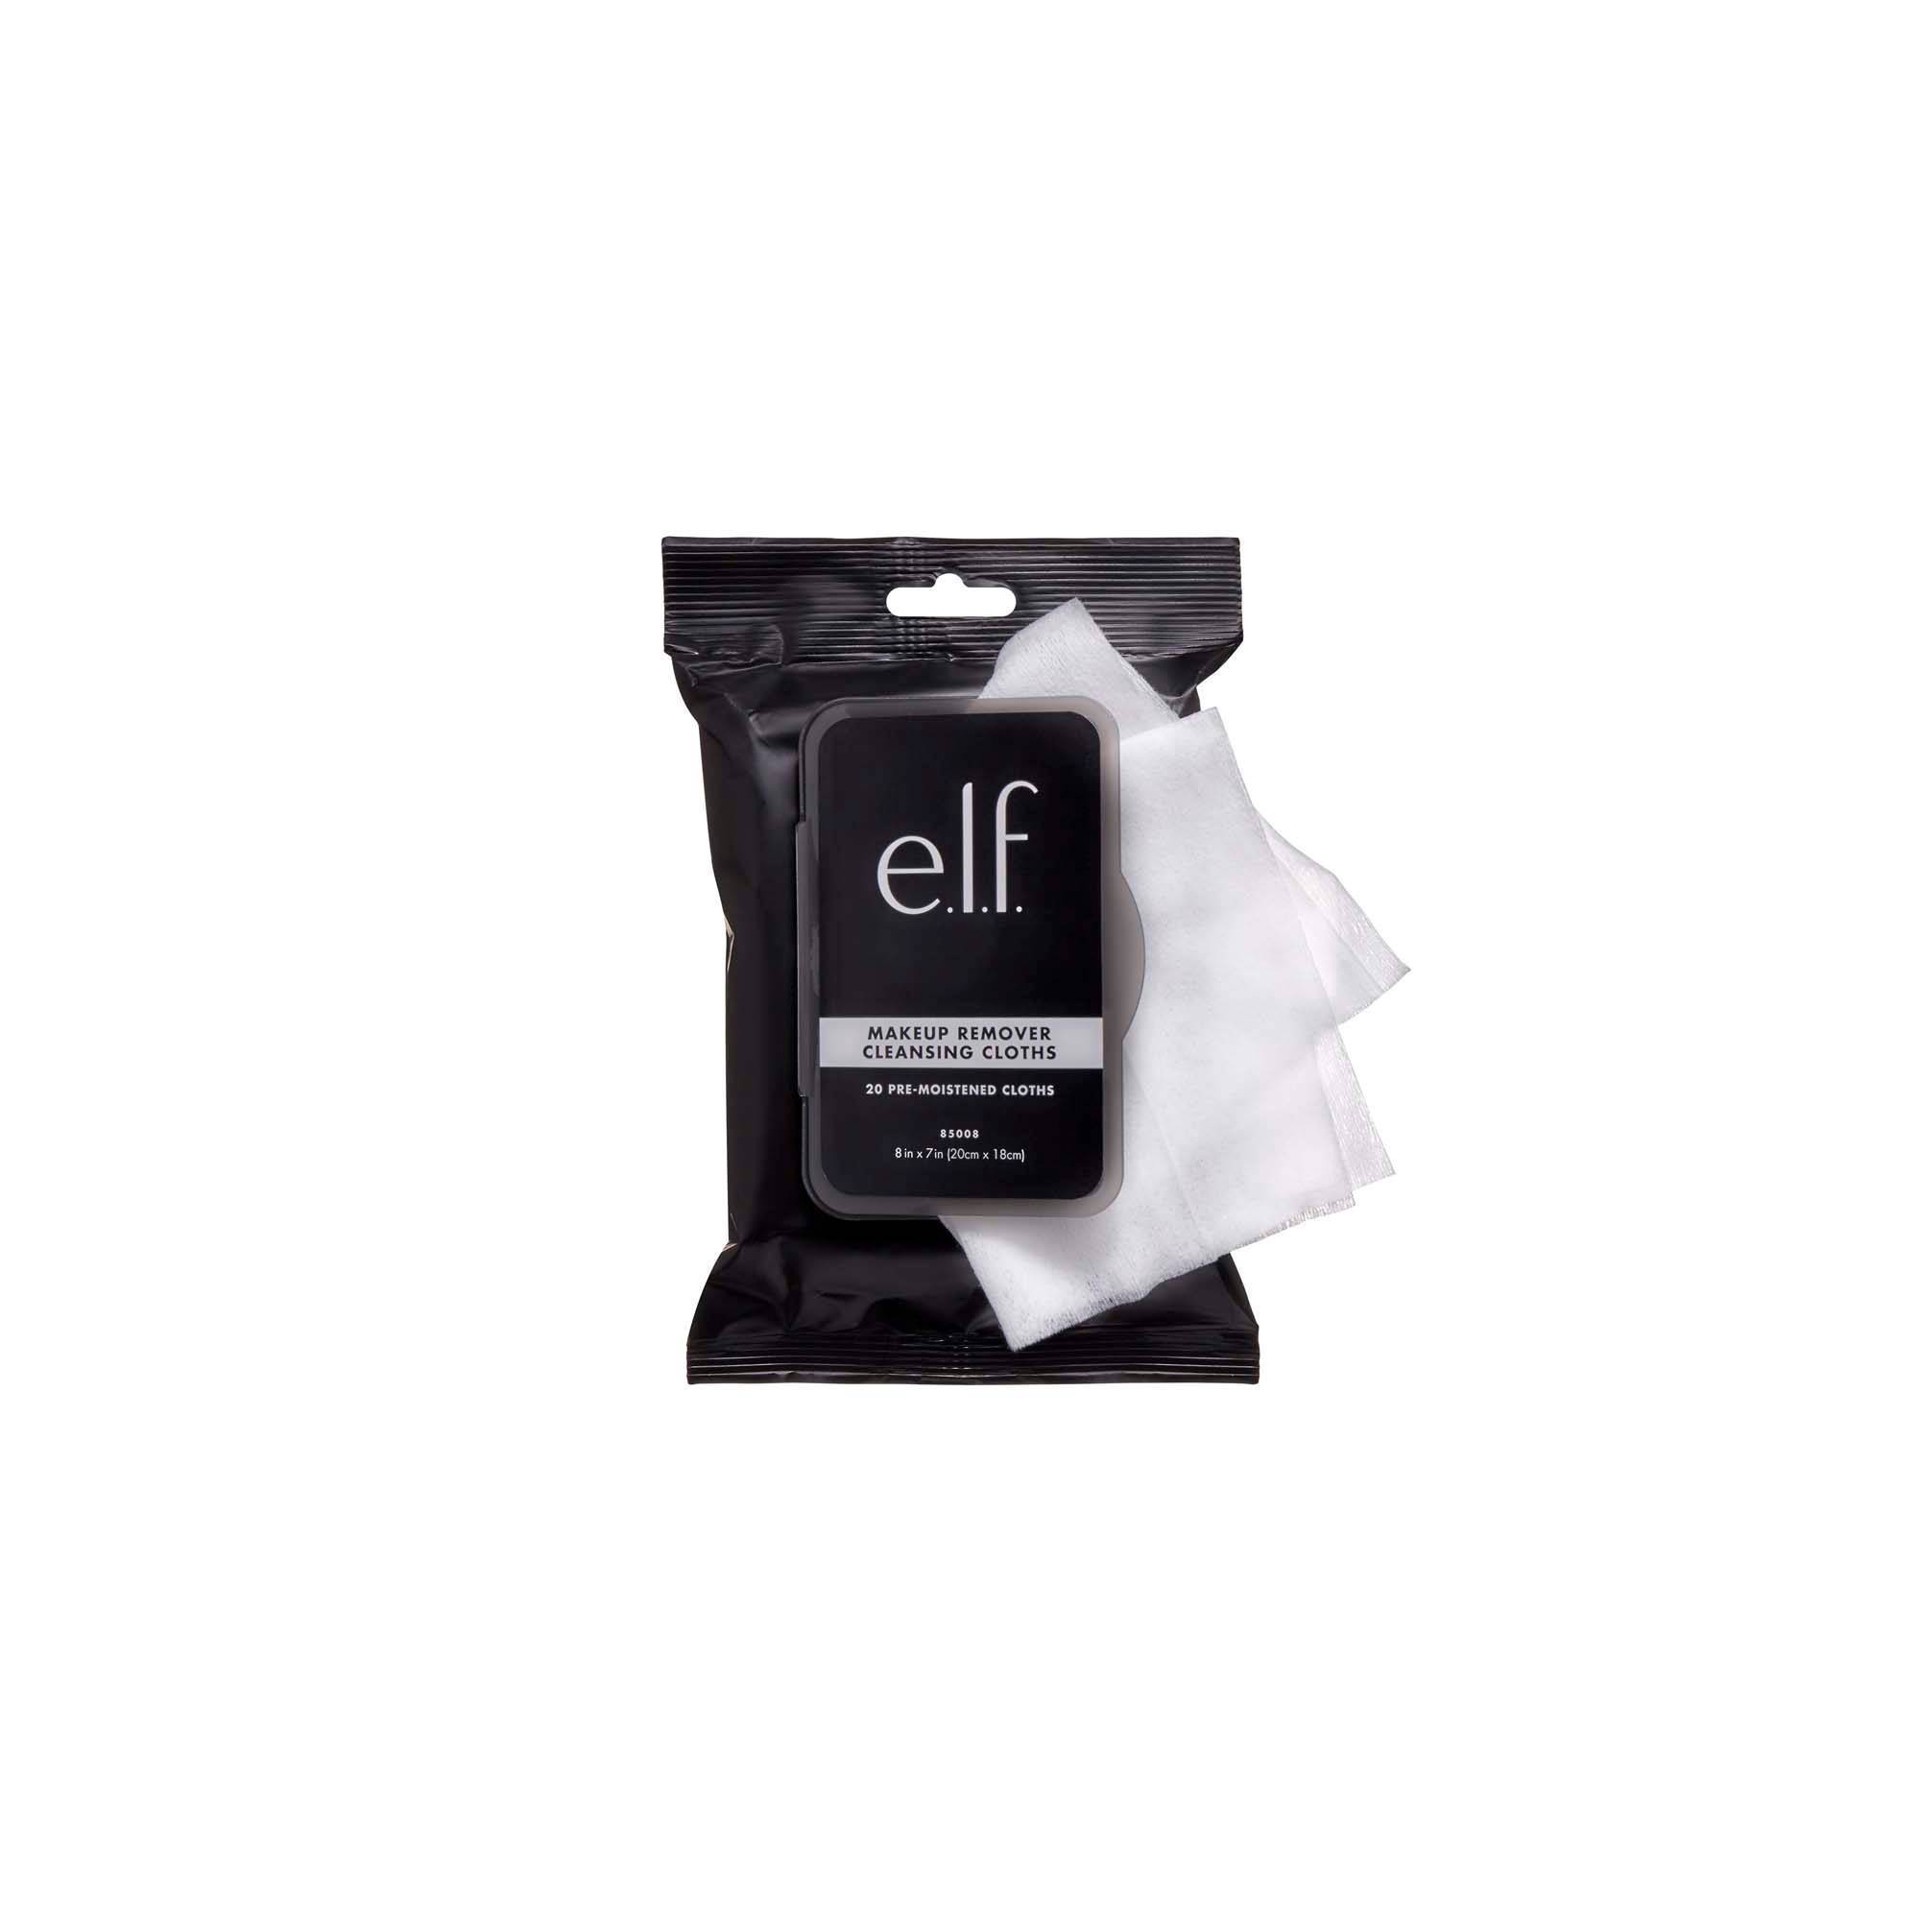 slide 1 of 3, e.l.f. Makeup Remover Cleansing Cloths, 20 ct